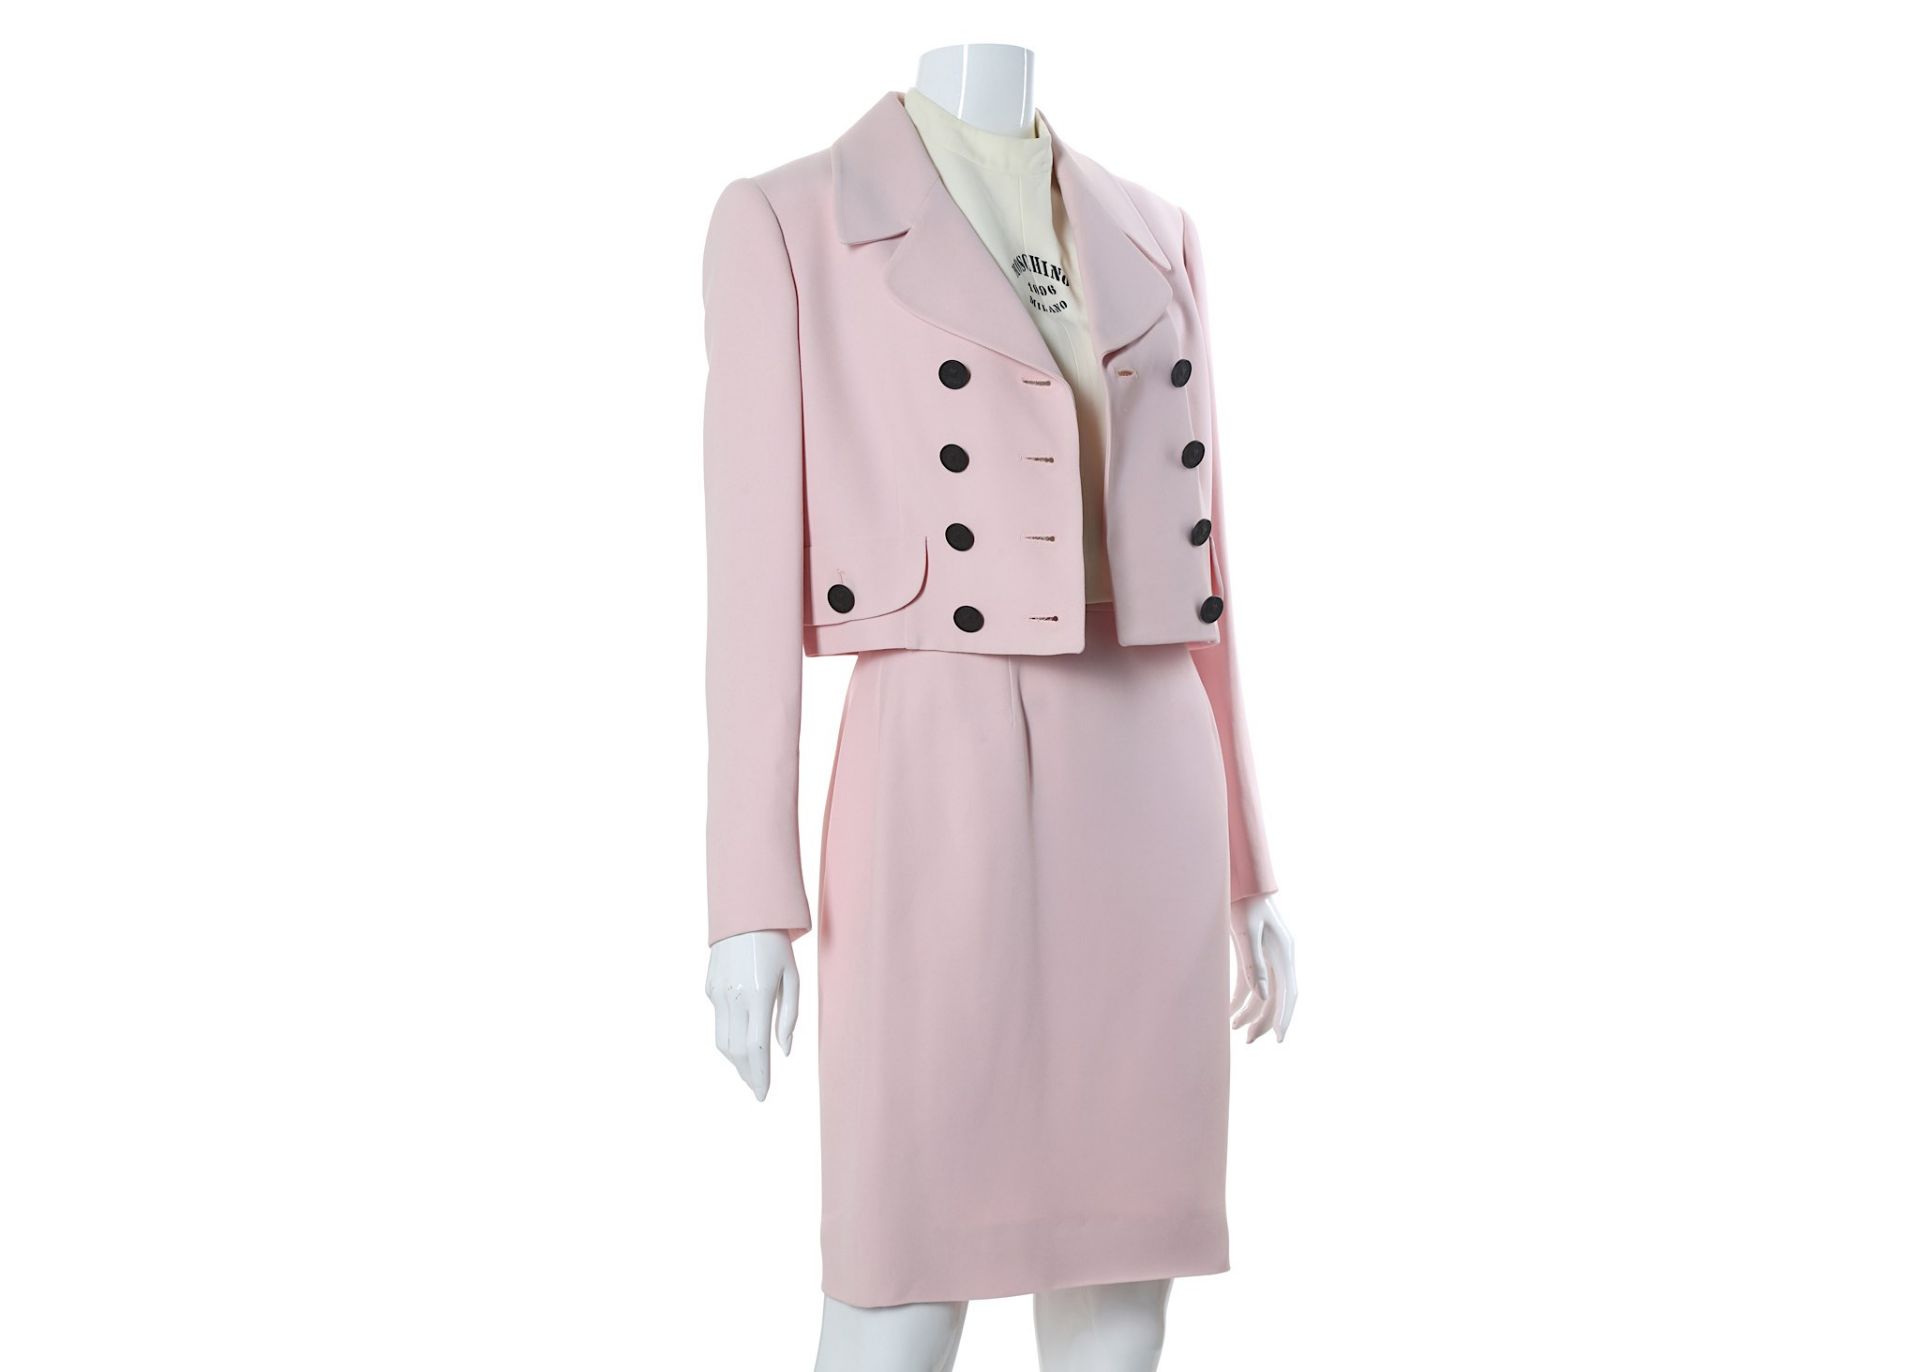 Moschino Cheap and Chic Pink Skirt Suit, 1990s, wi